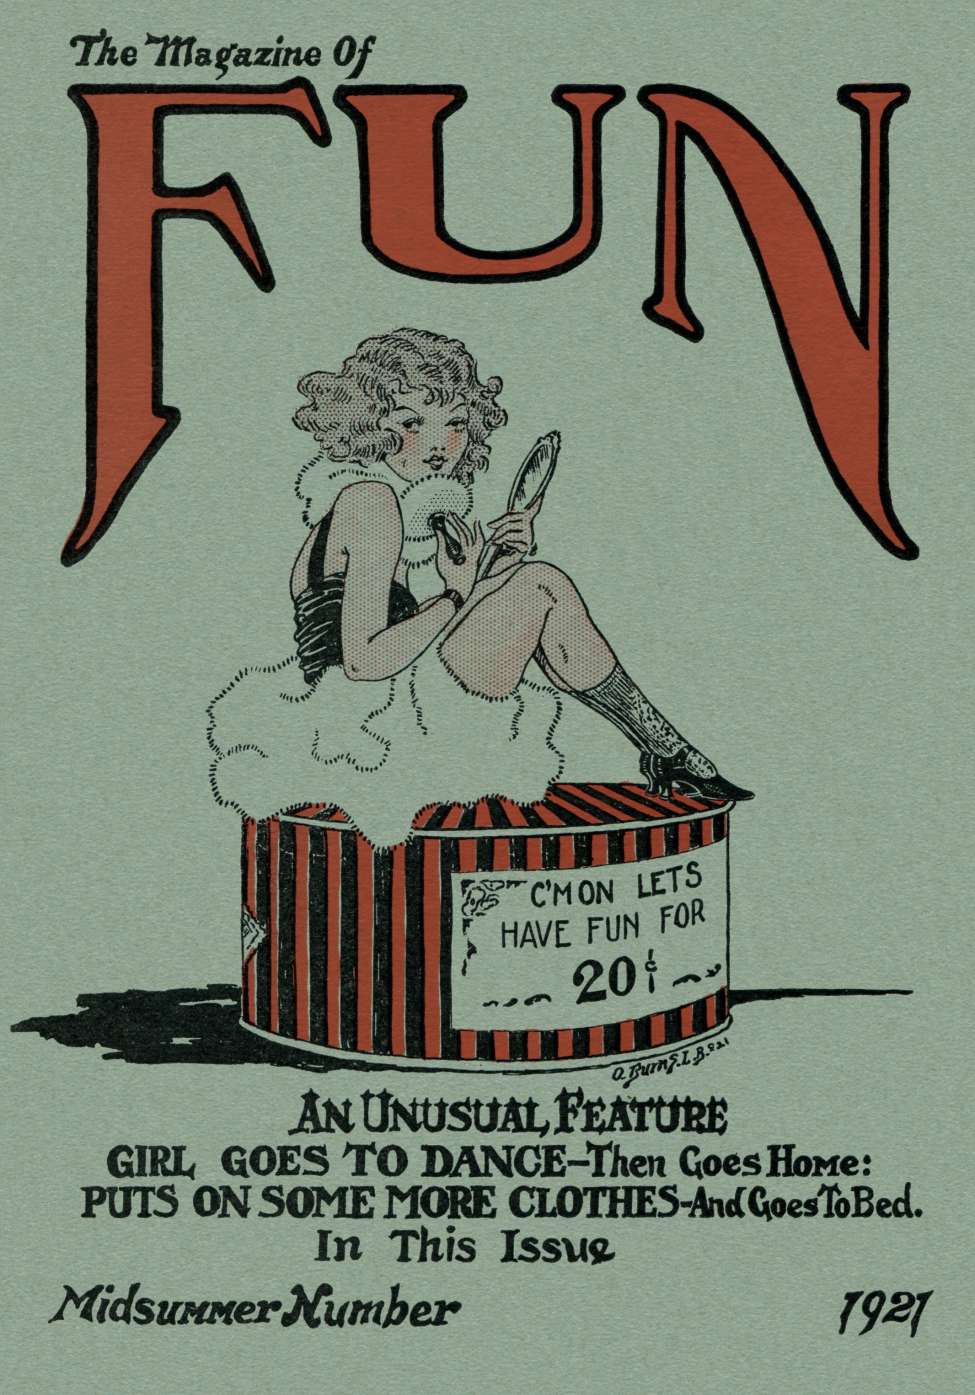 Book Cover For The Magazine Of Fun v1 1